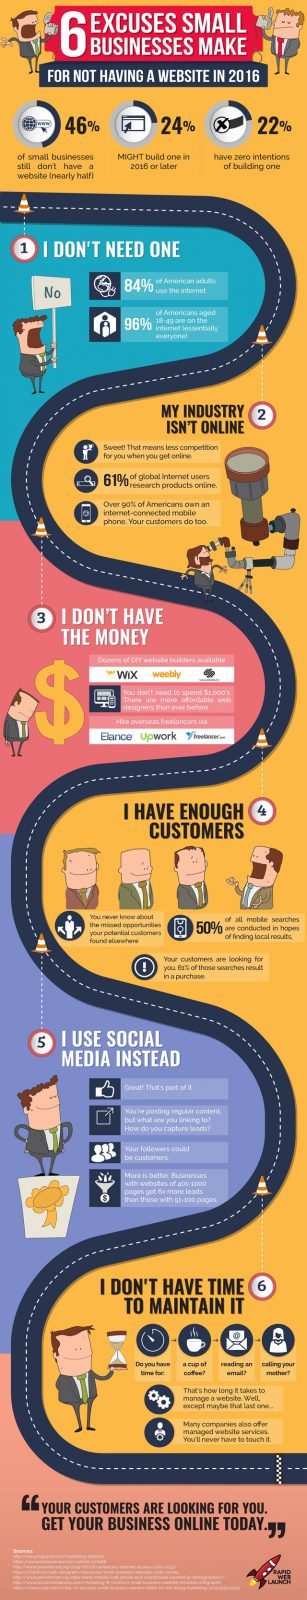 Infographic containing excuses why small businesses don't have a website in 2016.